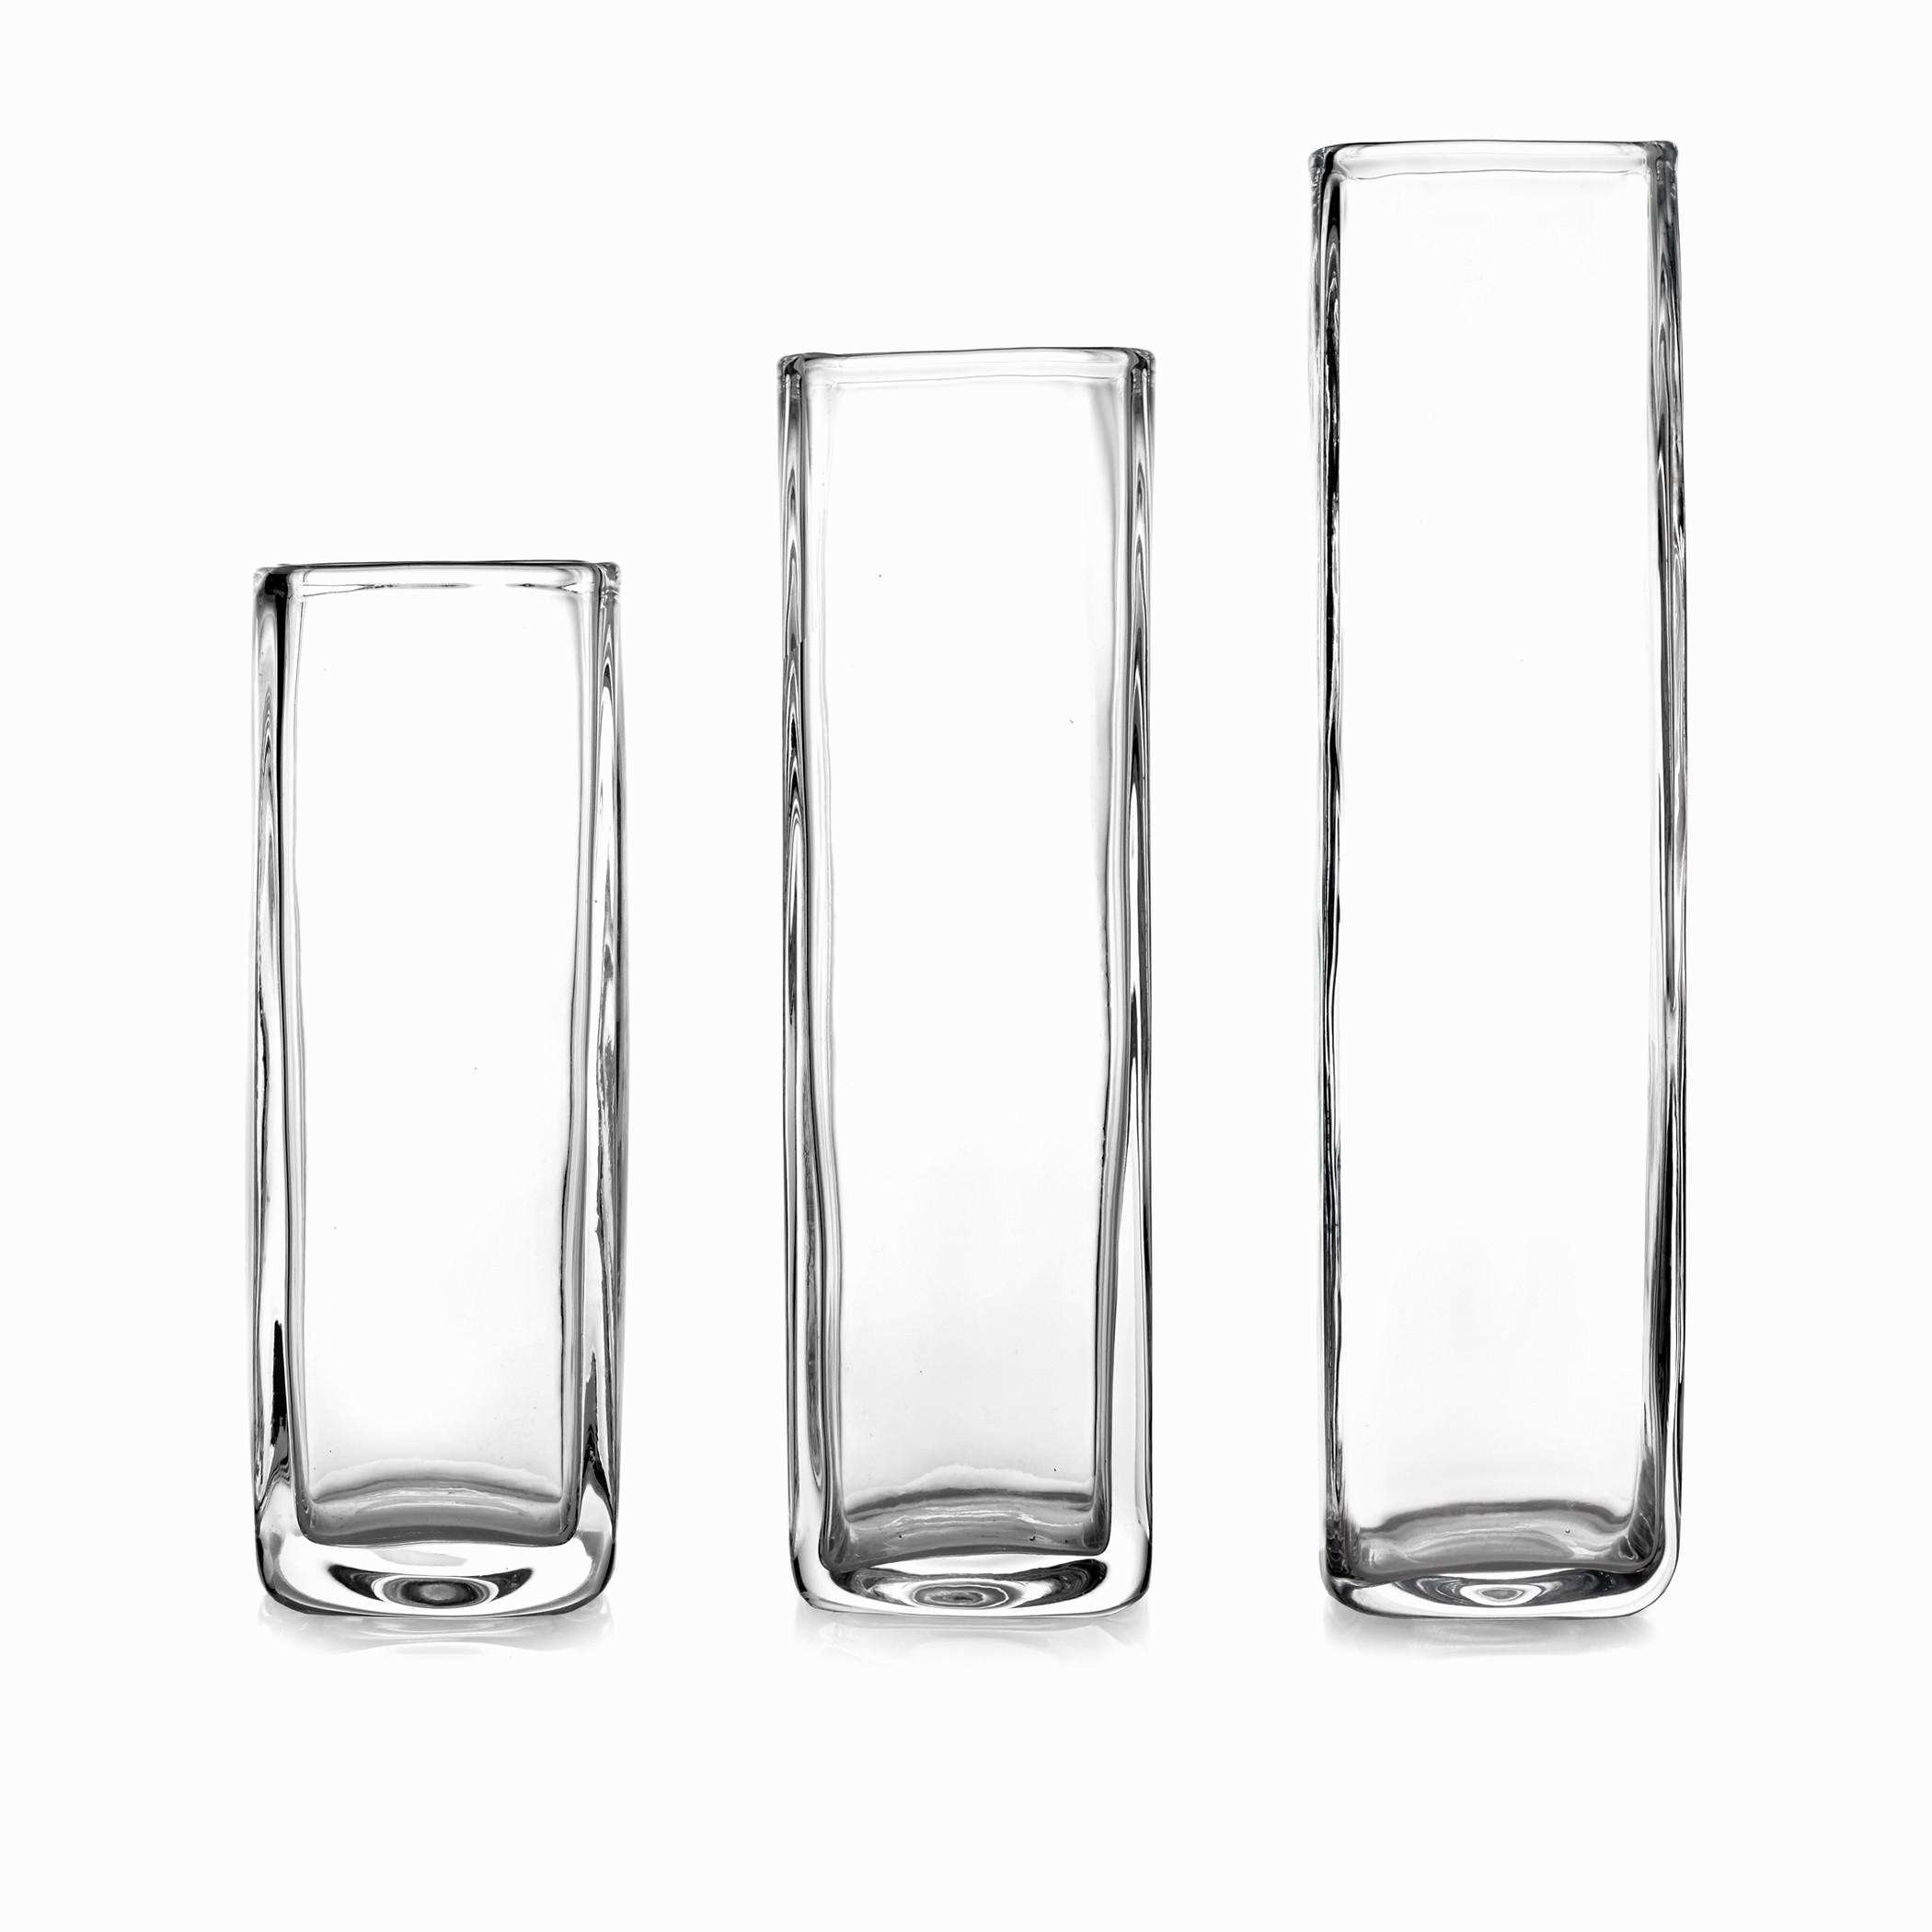 15 Awesome 5 X 20 Glass Cylinder Vase 2024 free download 5 x 20 glass cylinder vase of black glass vases photos living room vase glass lovely cheap glass with black glass vases images glass wedding centerpieces inspirational living room tall glass